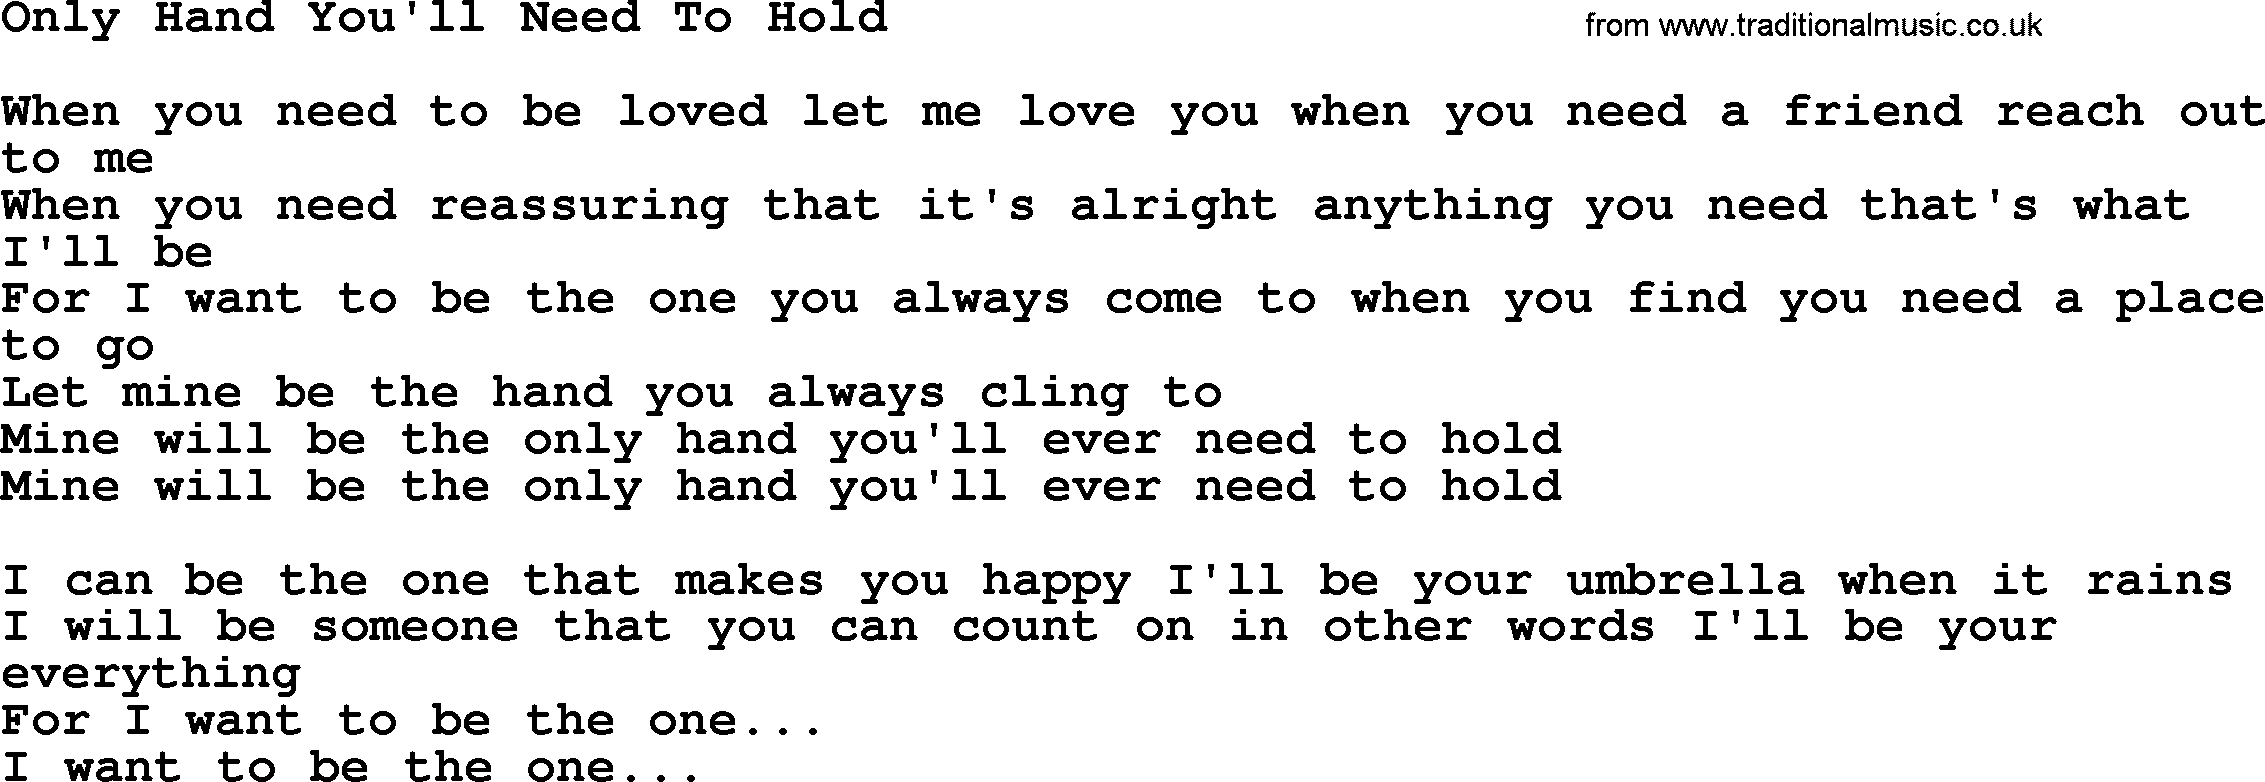 Dolly Parton song Only Hand You'll Need To Hold.txt lyrics